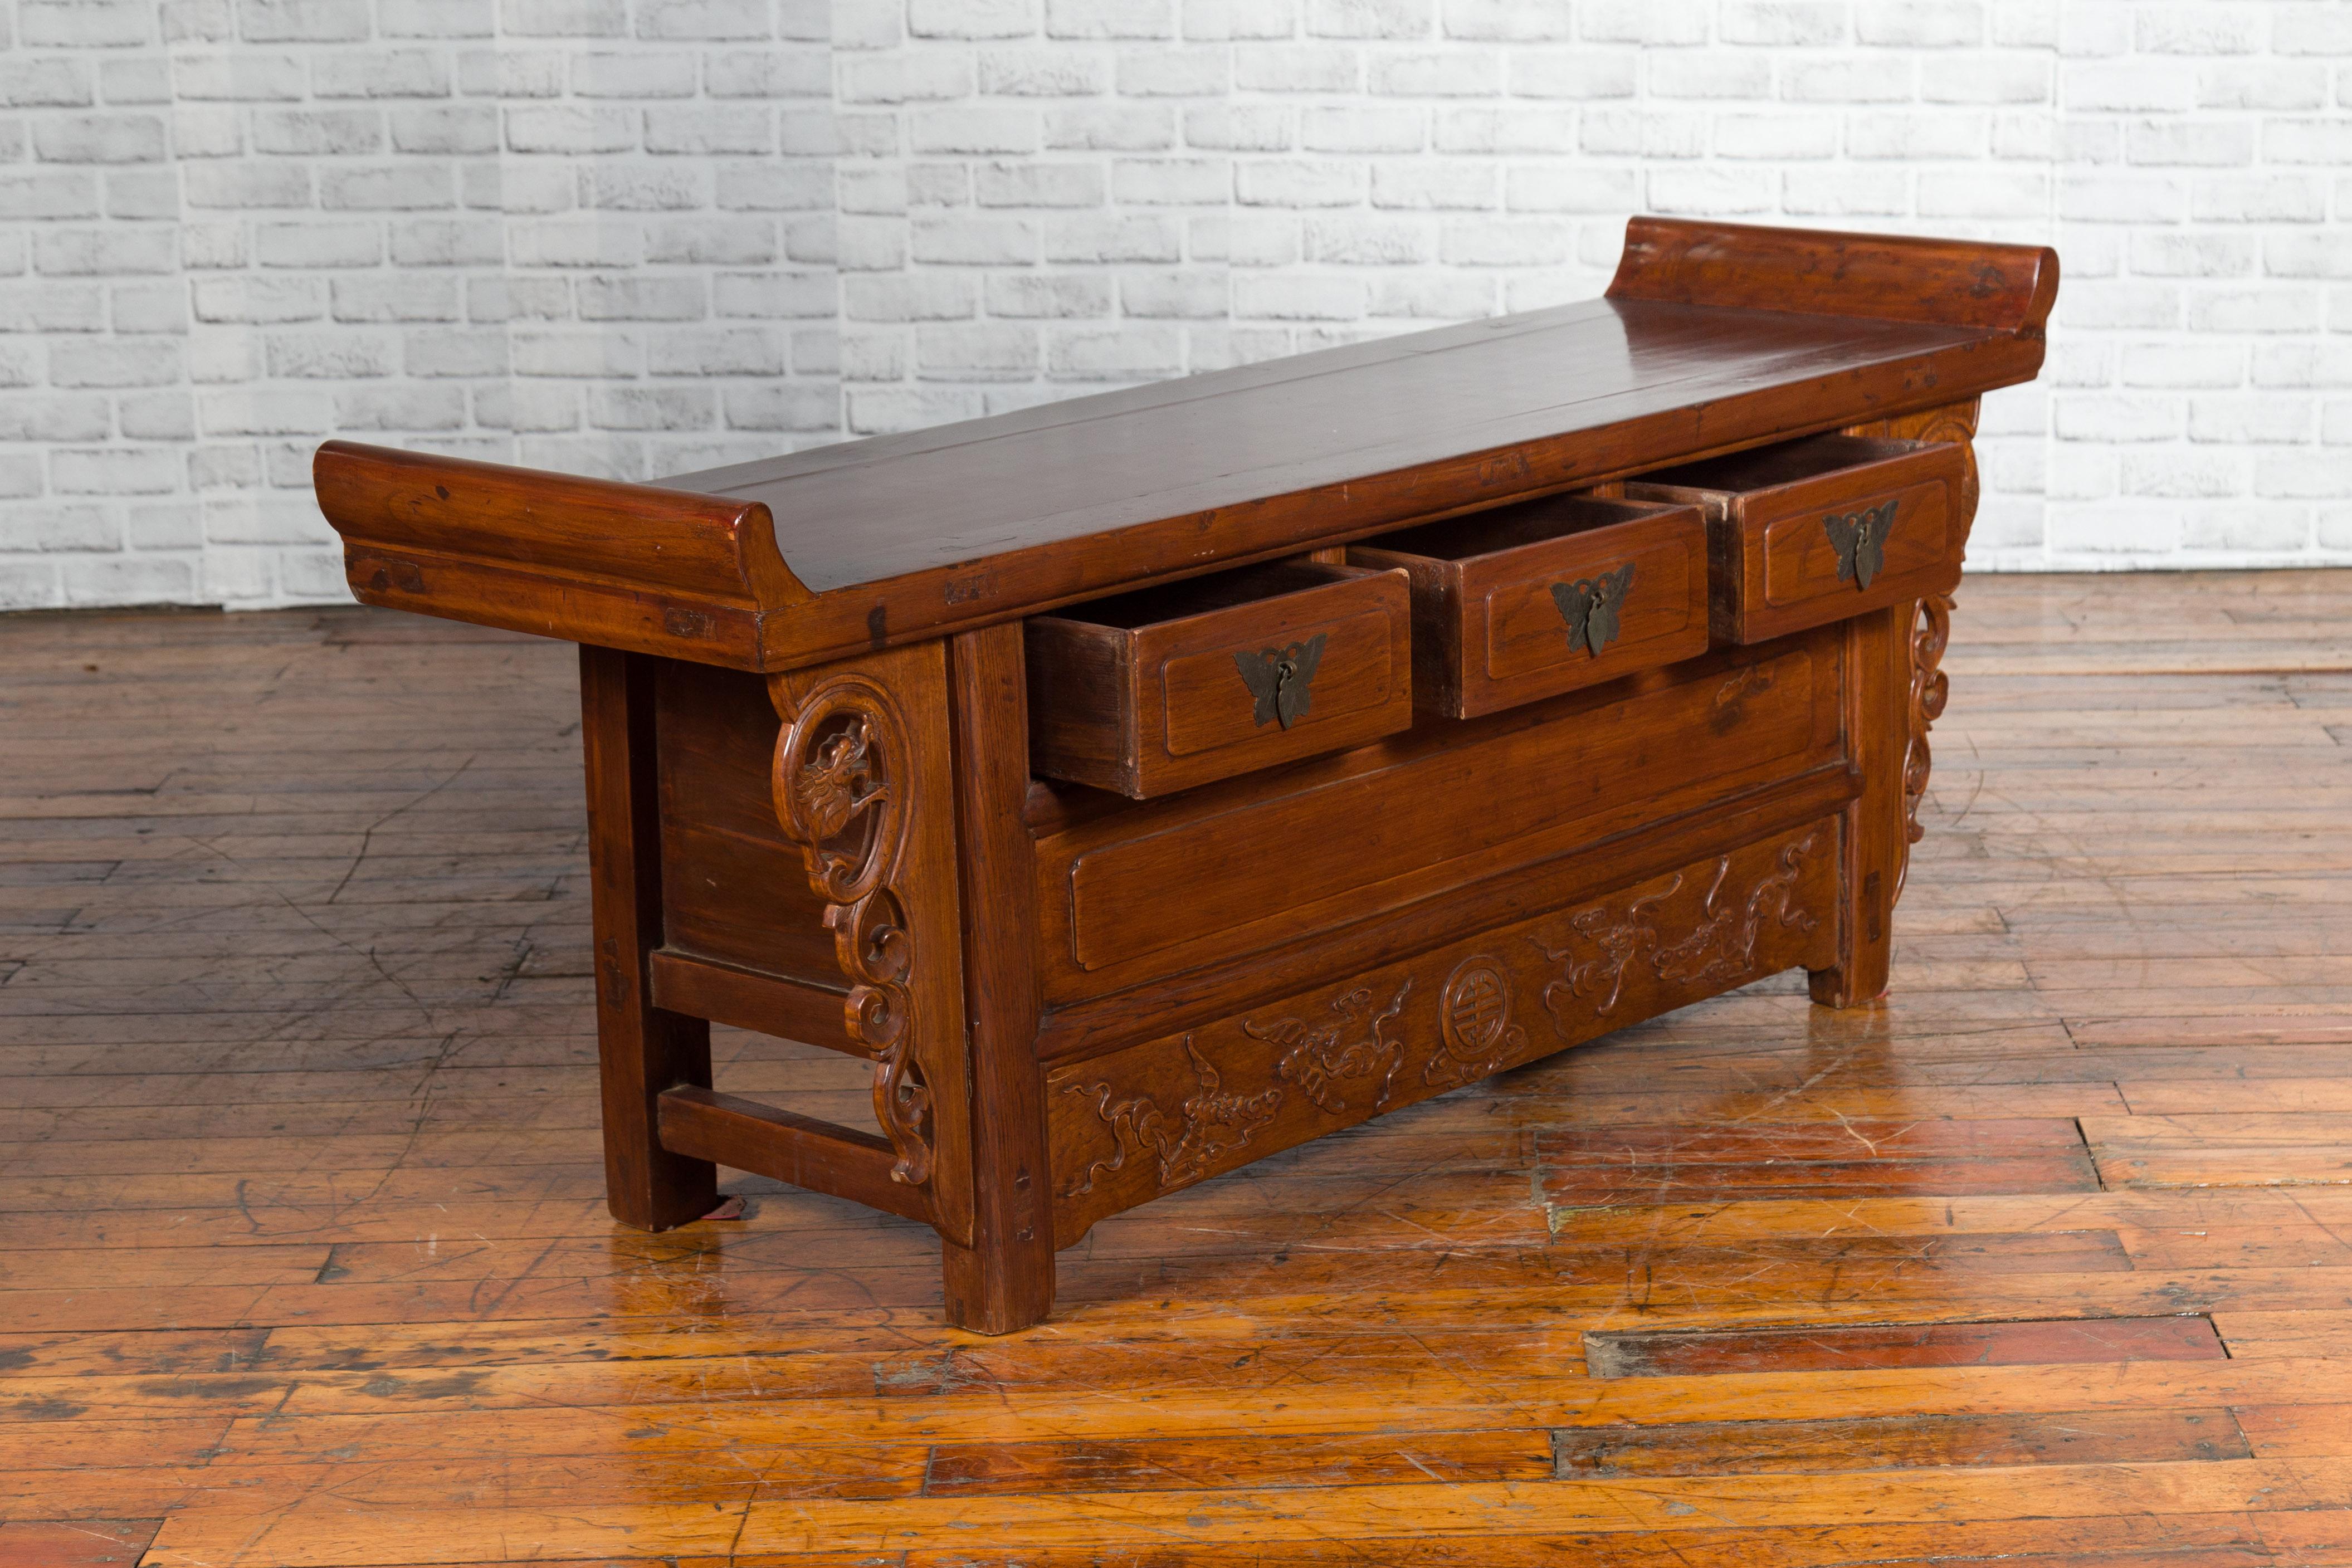 Qing Chinese Elm Three-Drawer Kang Cabinet with Everted Flanges and Carved Spandrels For Sale